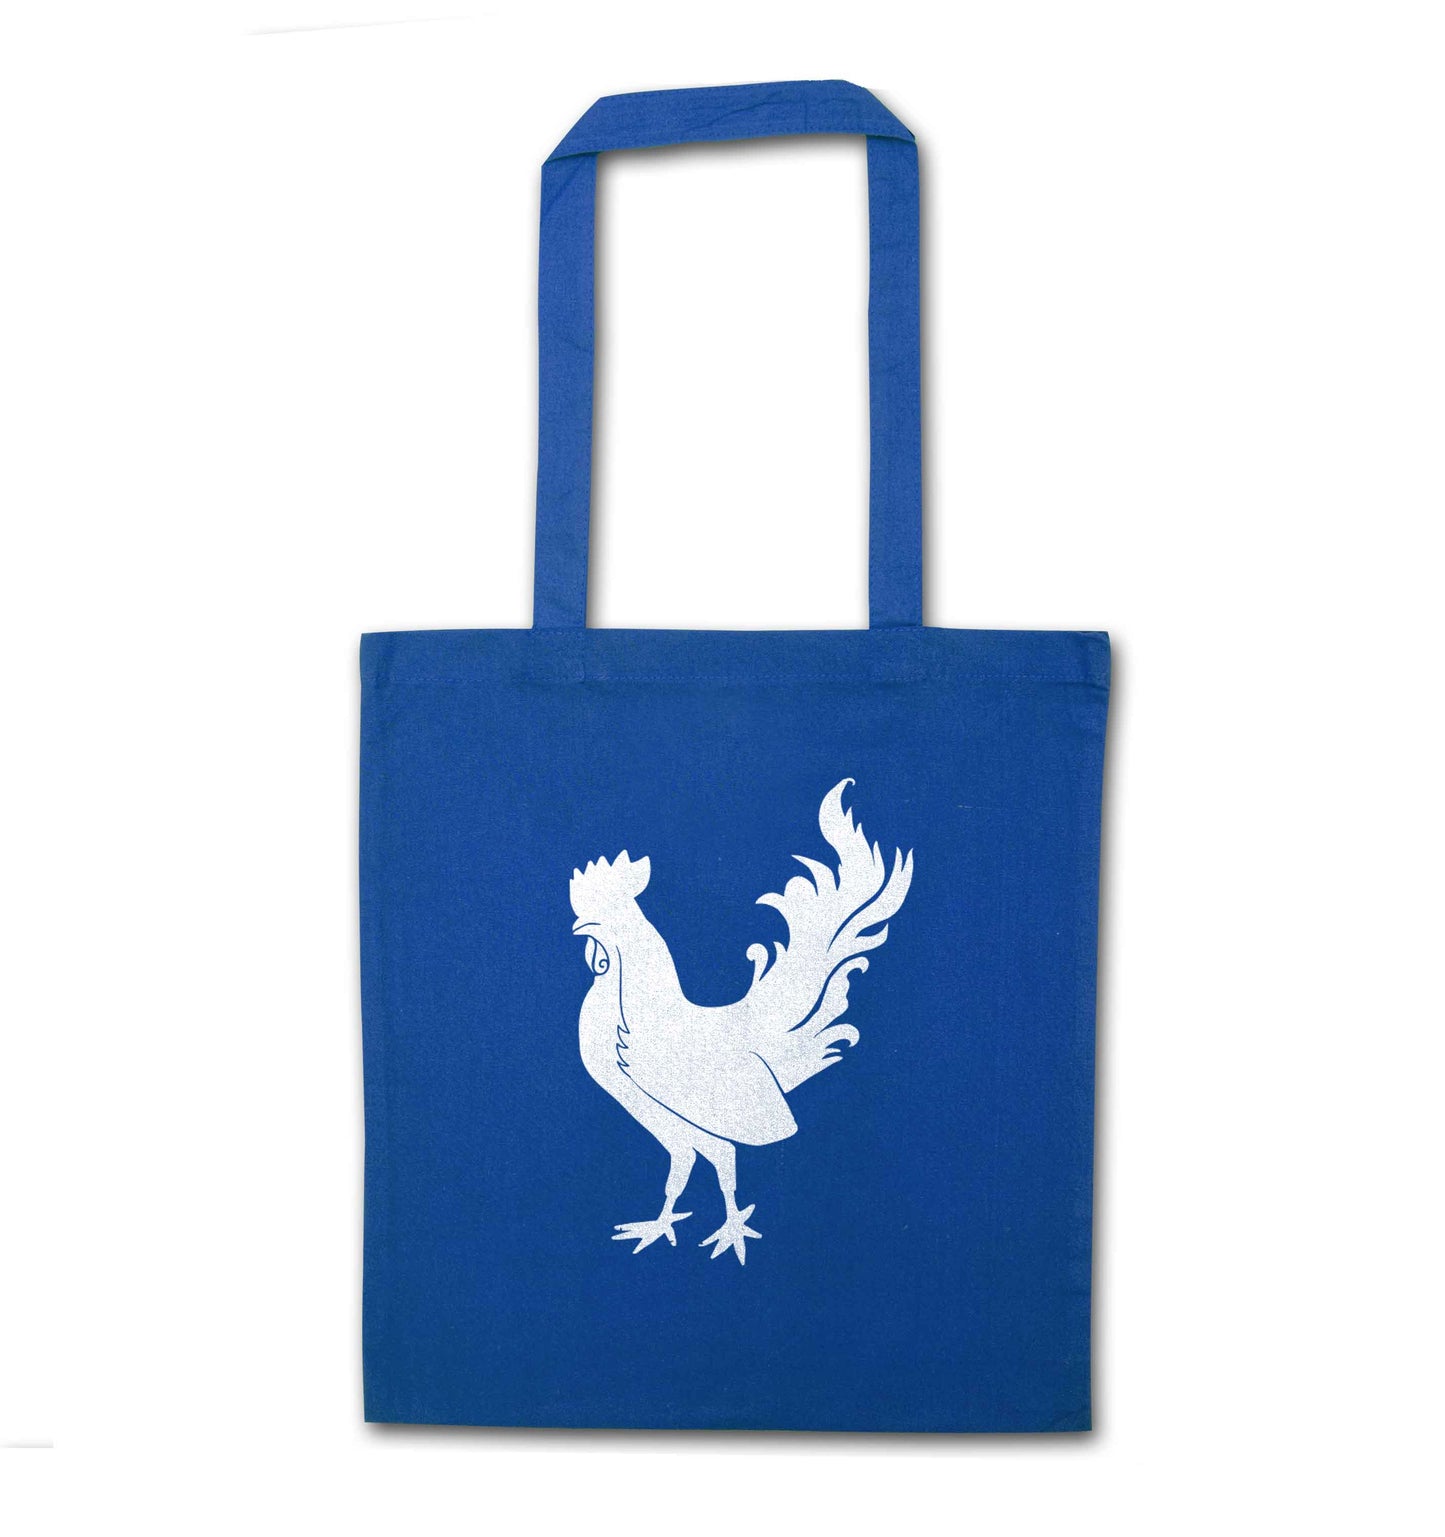 Rooster blue tote bag